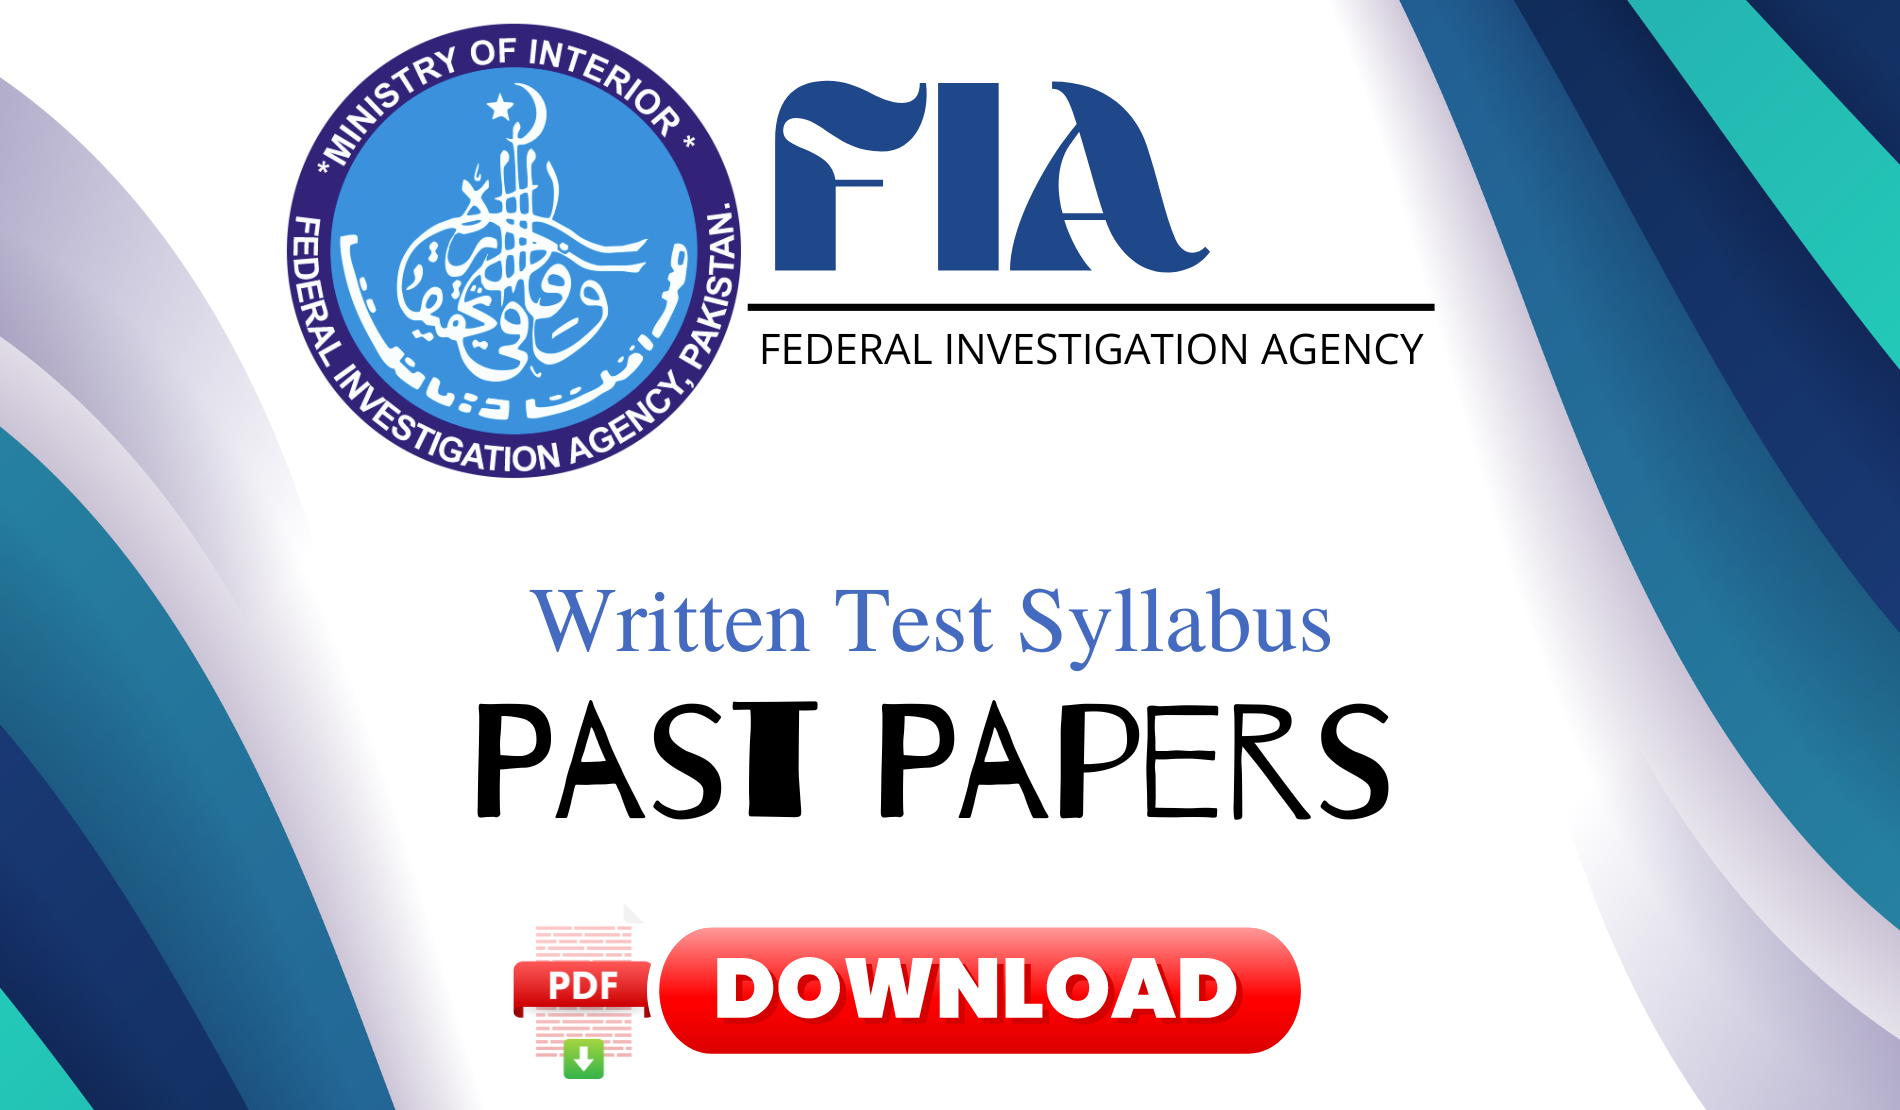 FIA Past Papers Download | Books and Written Test Syllabus